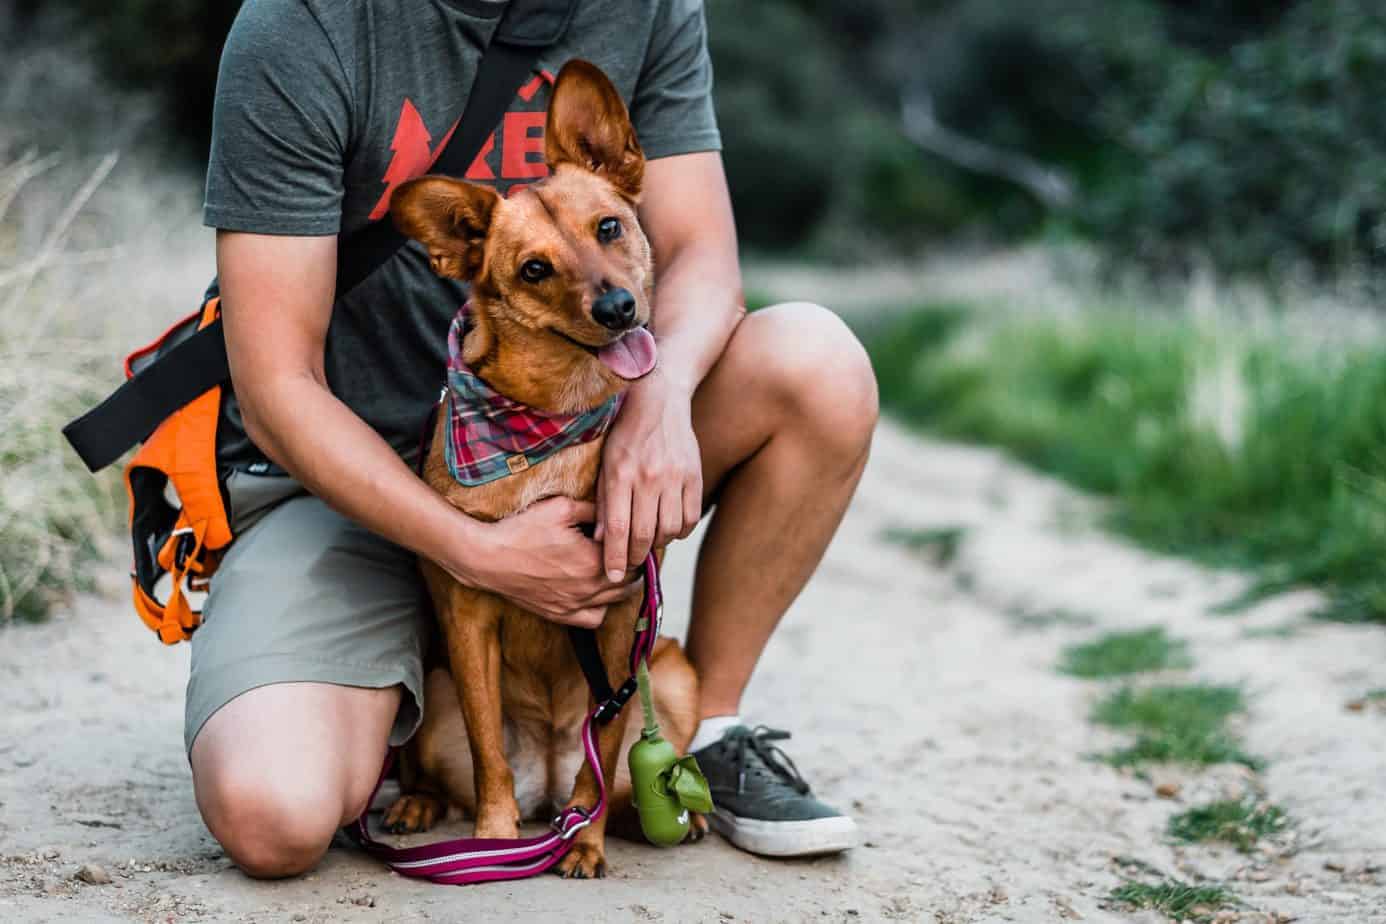 Happy dog on a hike with his owner. Pet foster parents help dogs feel loved and cared for, even if it is temporary until they find their forever home.